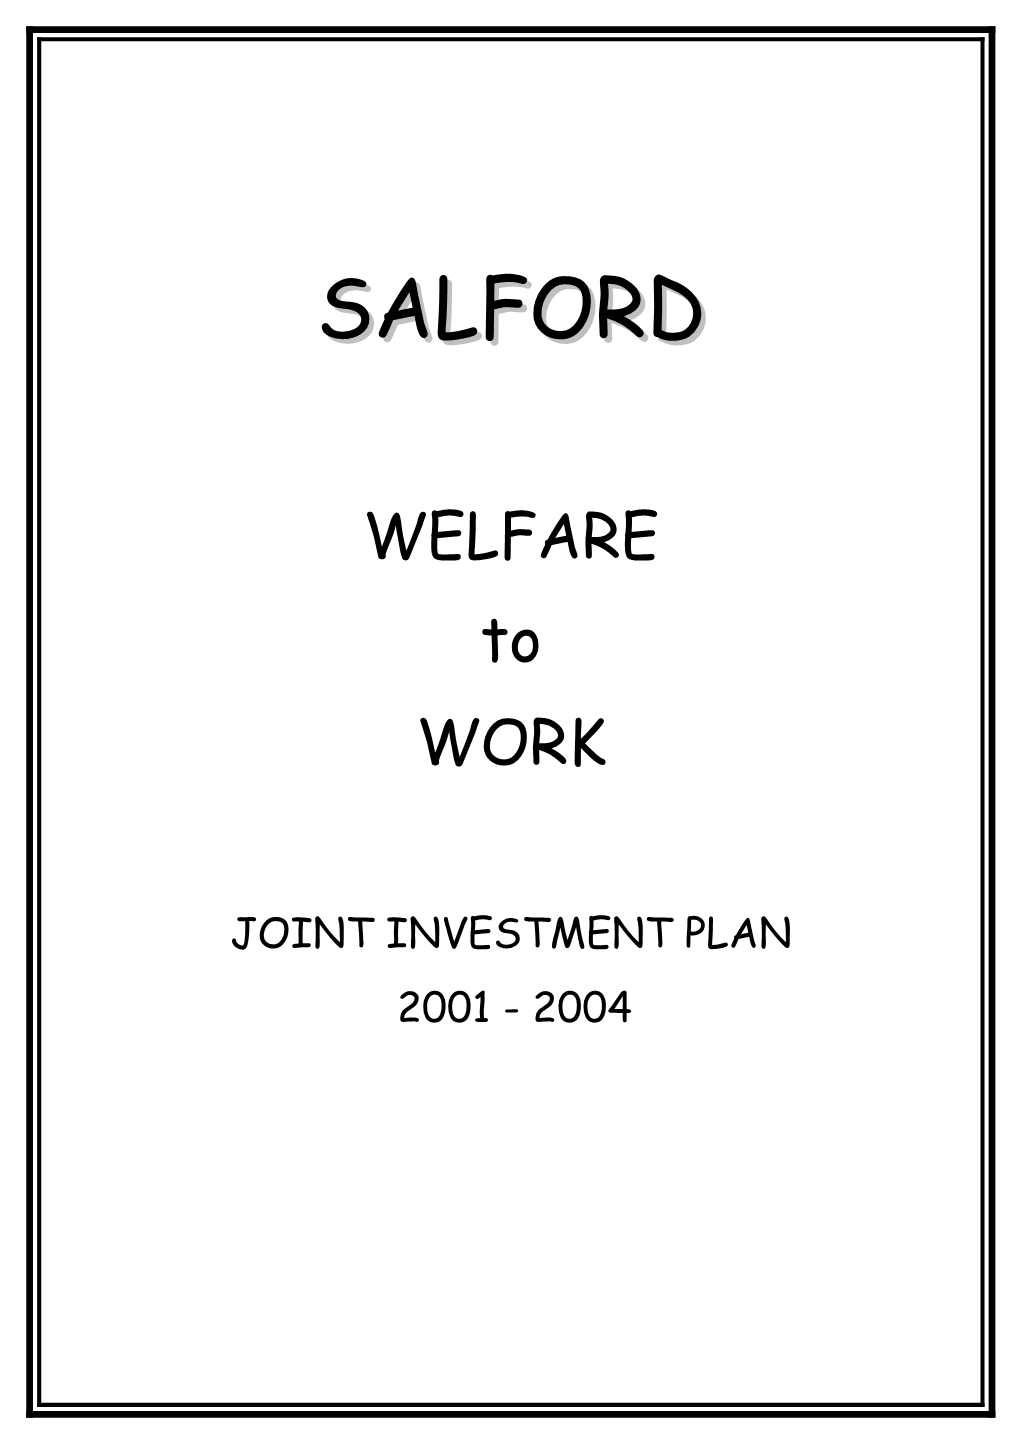 Salford Welfare to Work Joint Investment Plan 2001 - 2004